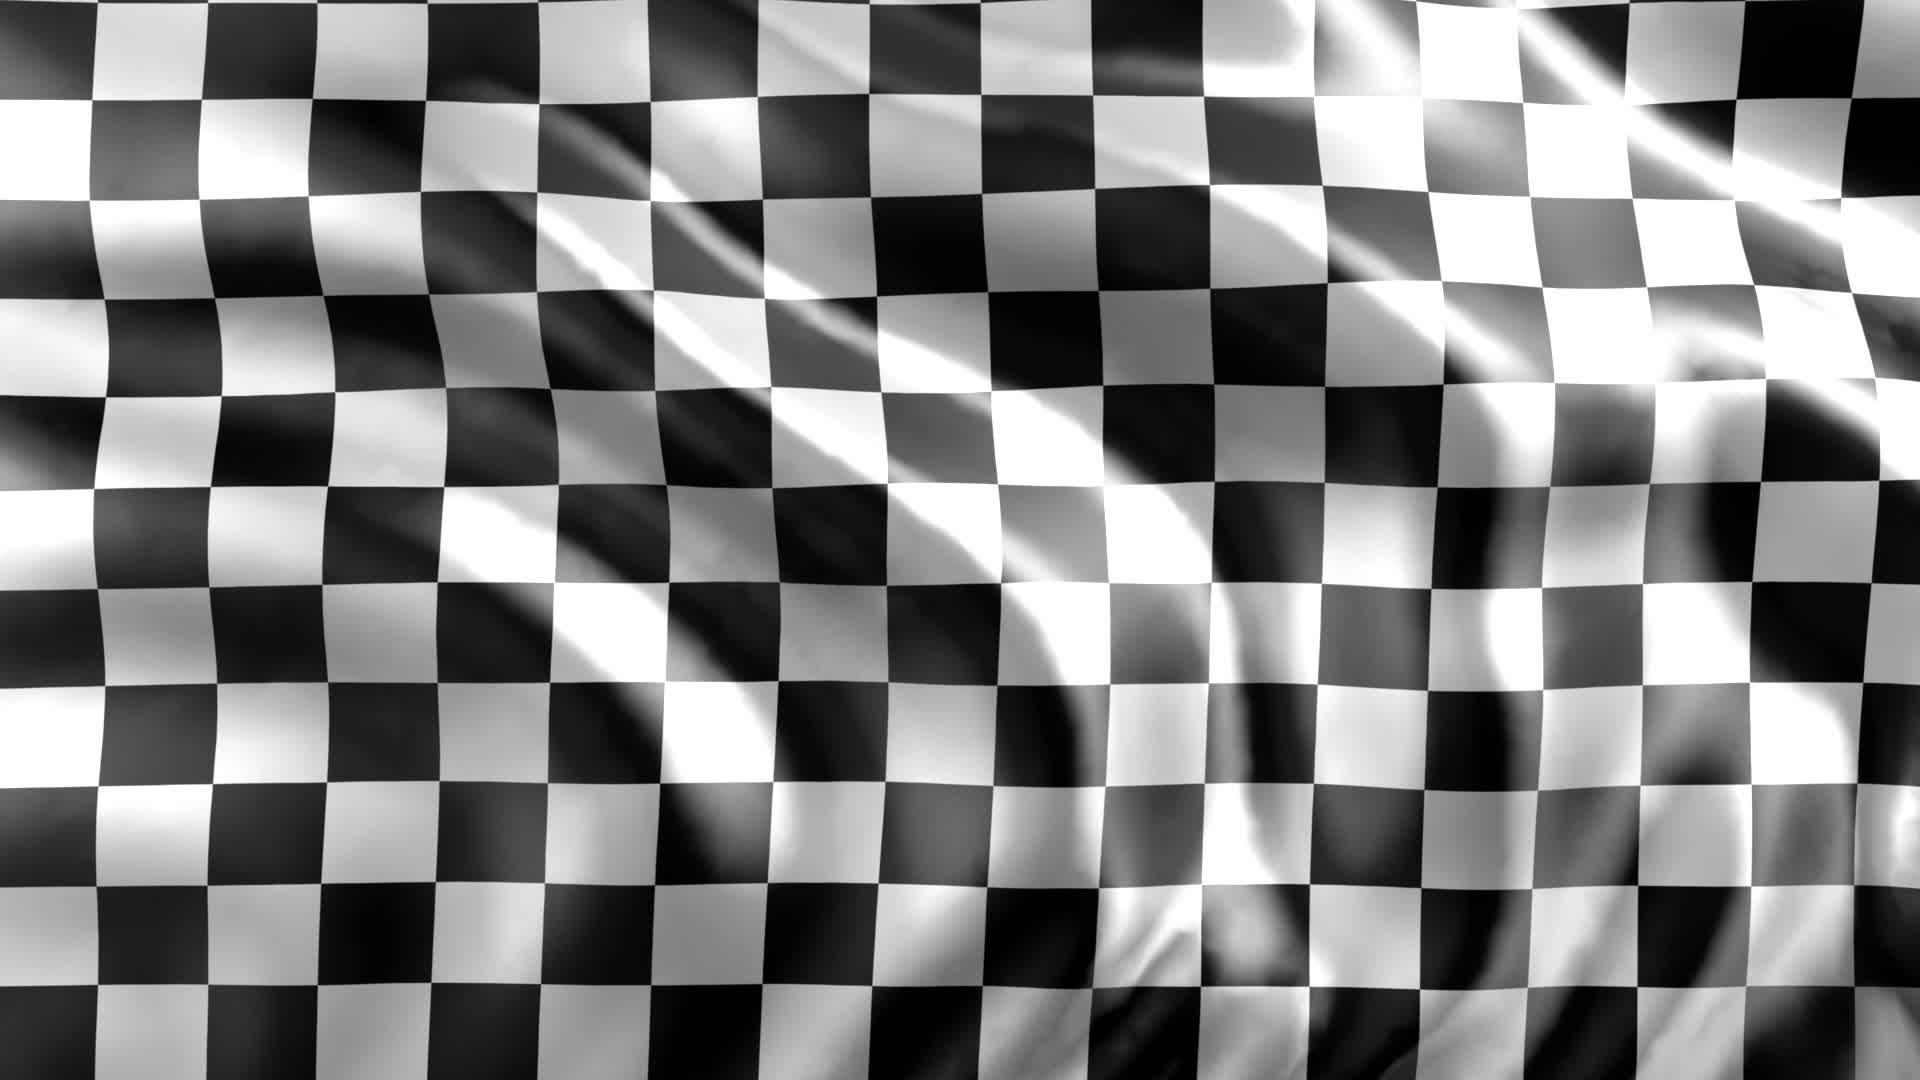 Chequered Flag Wallpaper Picture Of Flag Imageco.Org